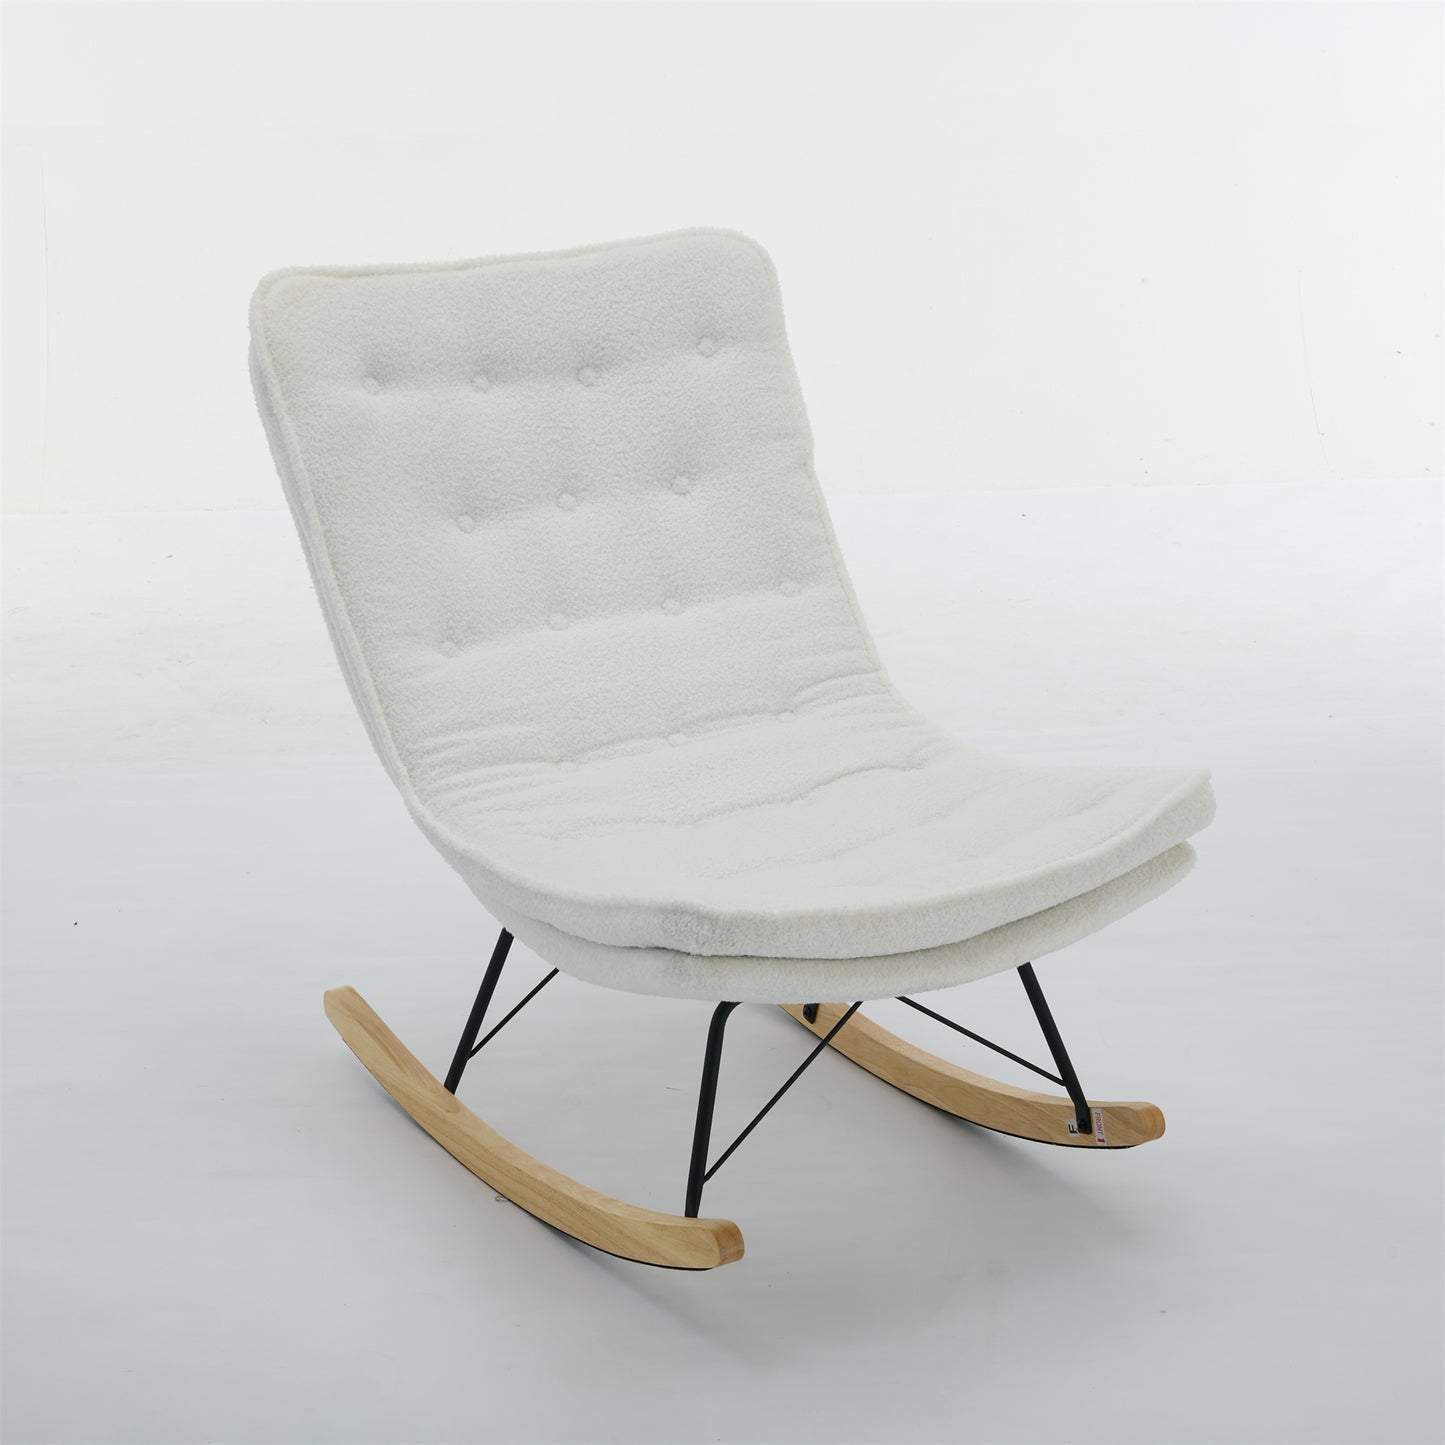 Lazy Rocking Chair,Comfortable Lounge Chair